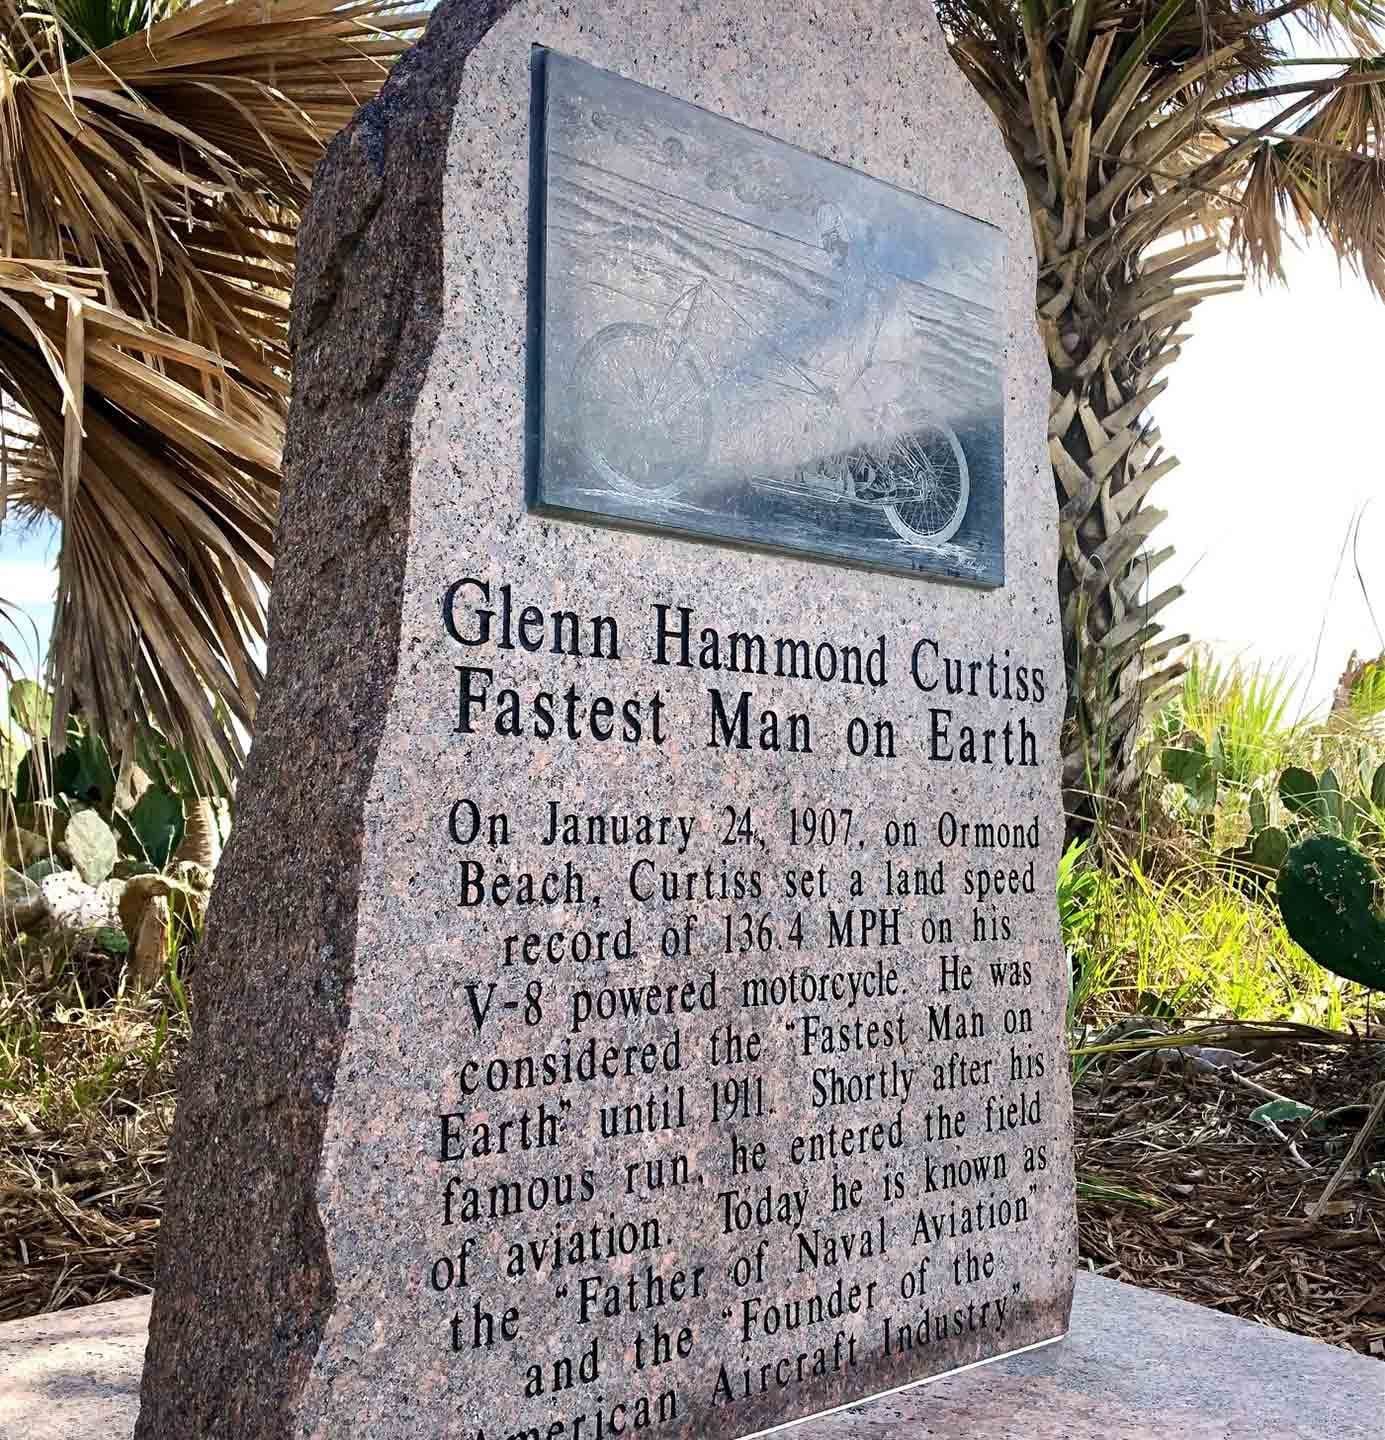 Another fascinating (but brief) getaway is the Birthplace of Speed Park, just north of Daytona Beach on A1A. One of the markers pays tribute to Glenn Curtiss, who set a speed record here on a V-8 motorcycle.